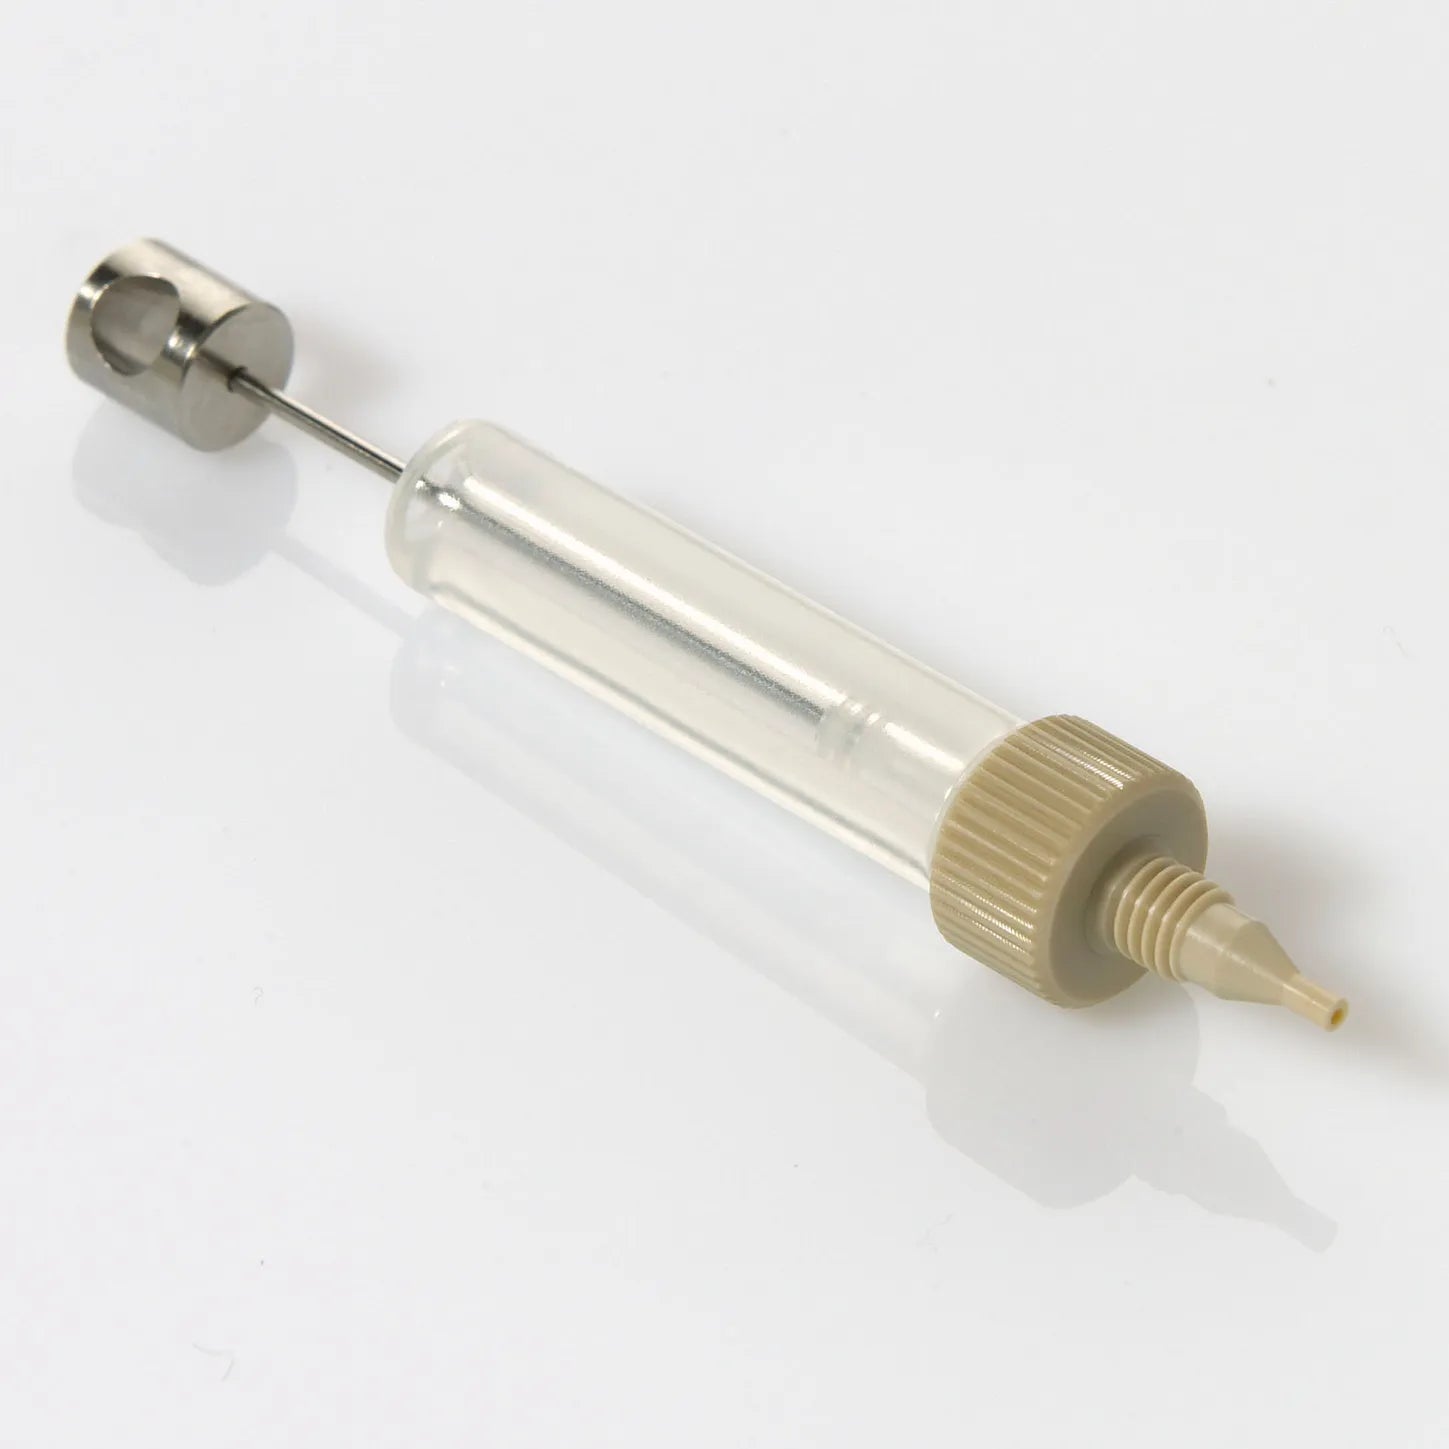 100µL Sample Metering Syringe, HP, Comparable to Waters # 700002570